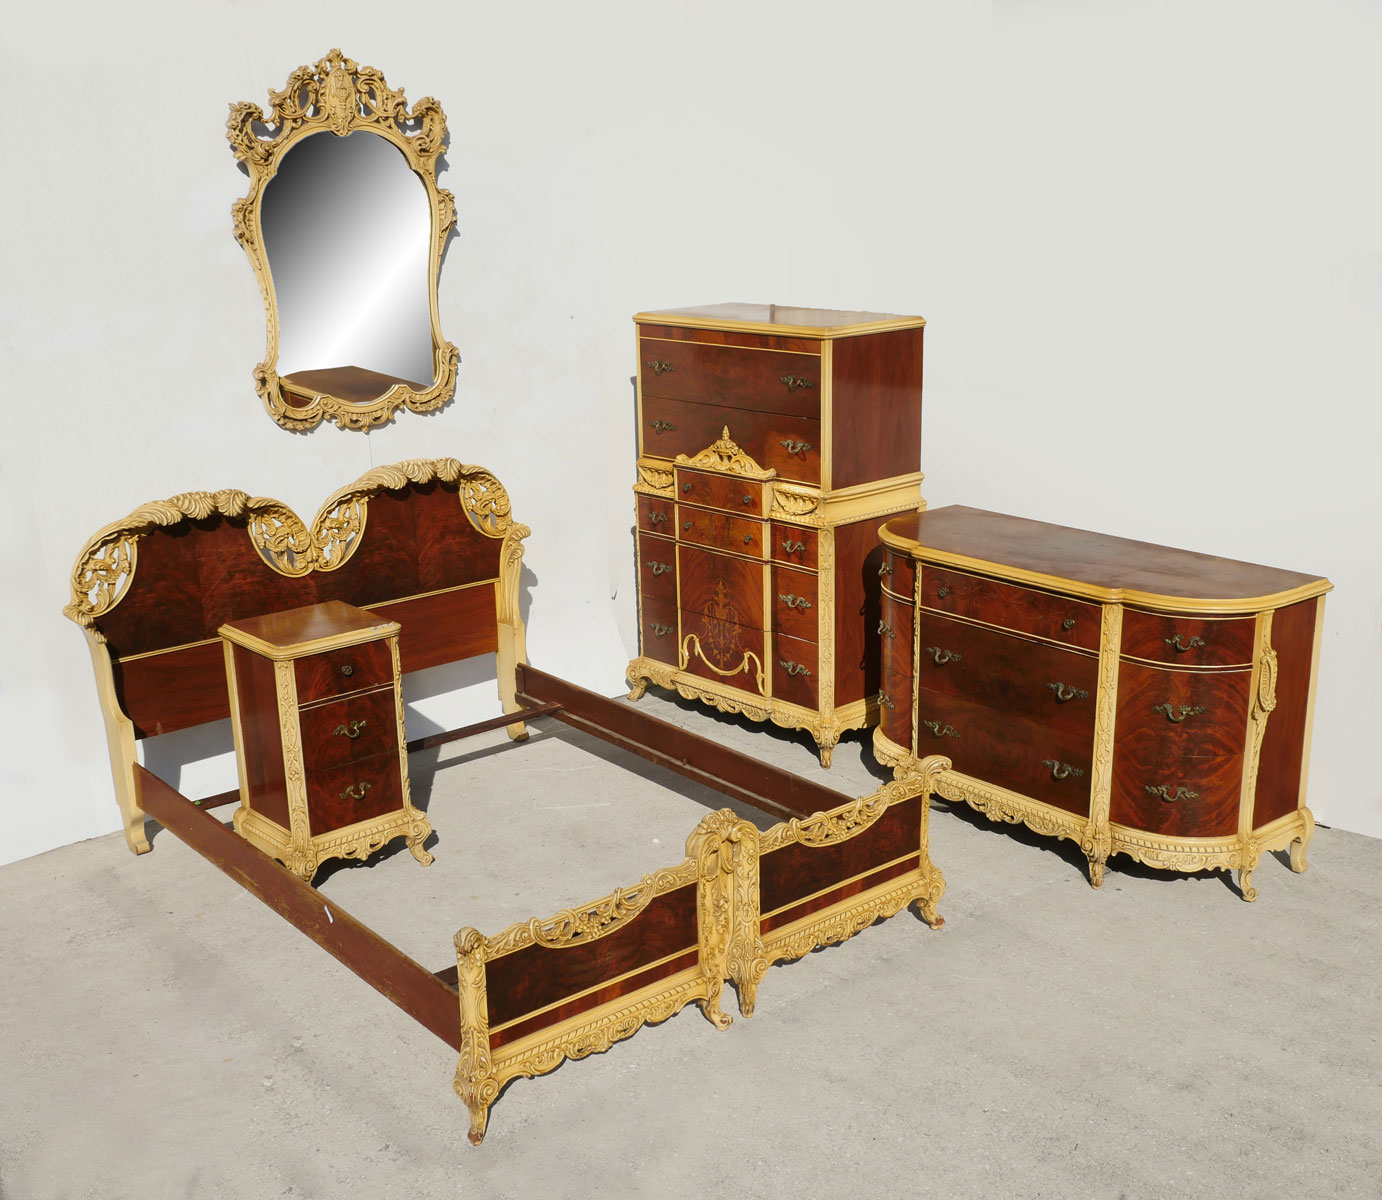 5 PIECE FRENCH CARVED BEDROOM SUITE: